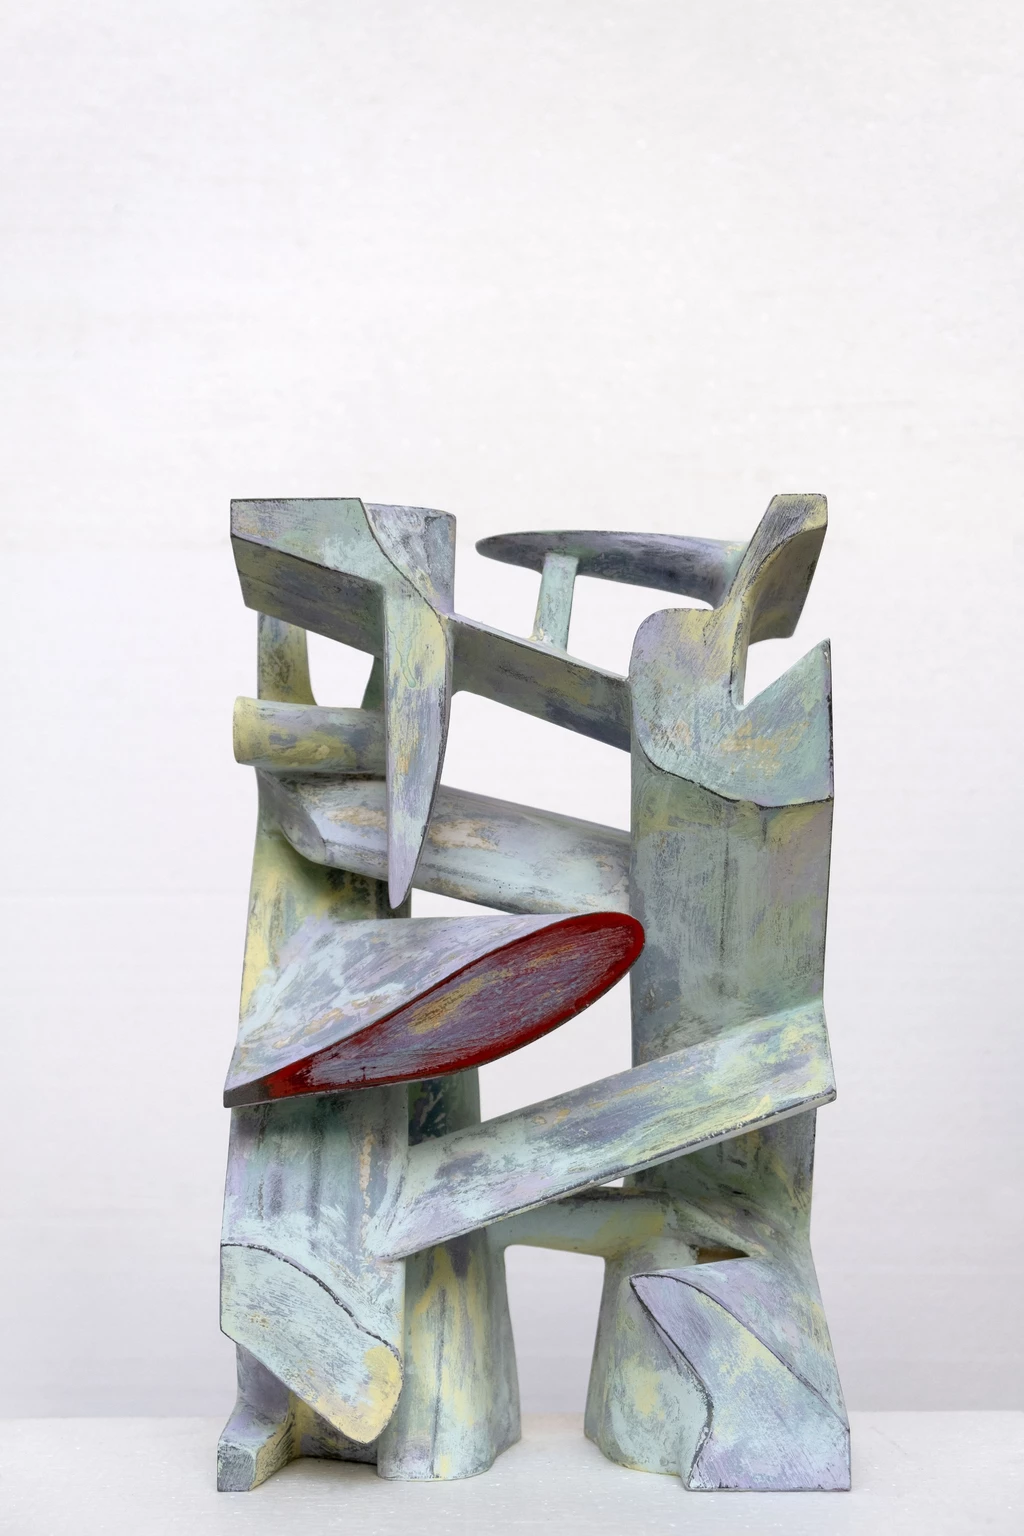 Longing 1., 2022 - colored and painted concrete, 40,5 x 25 x 12 cm